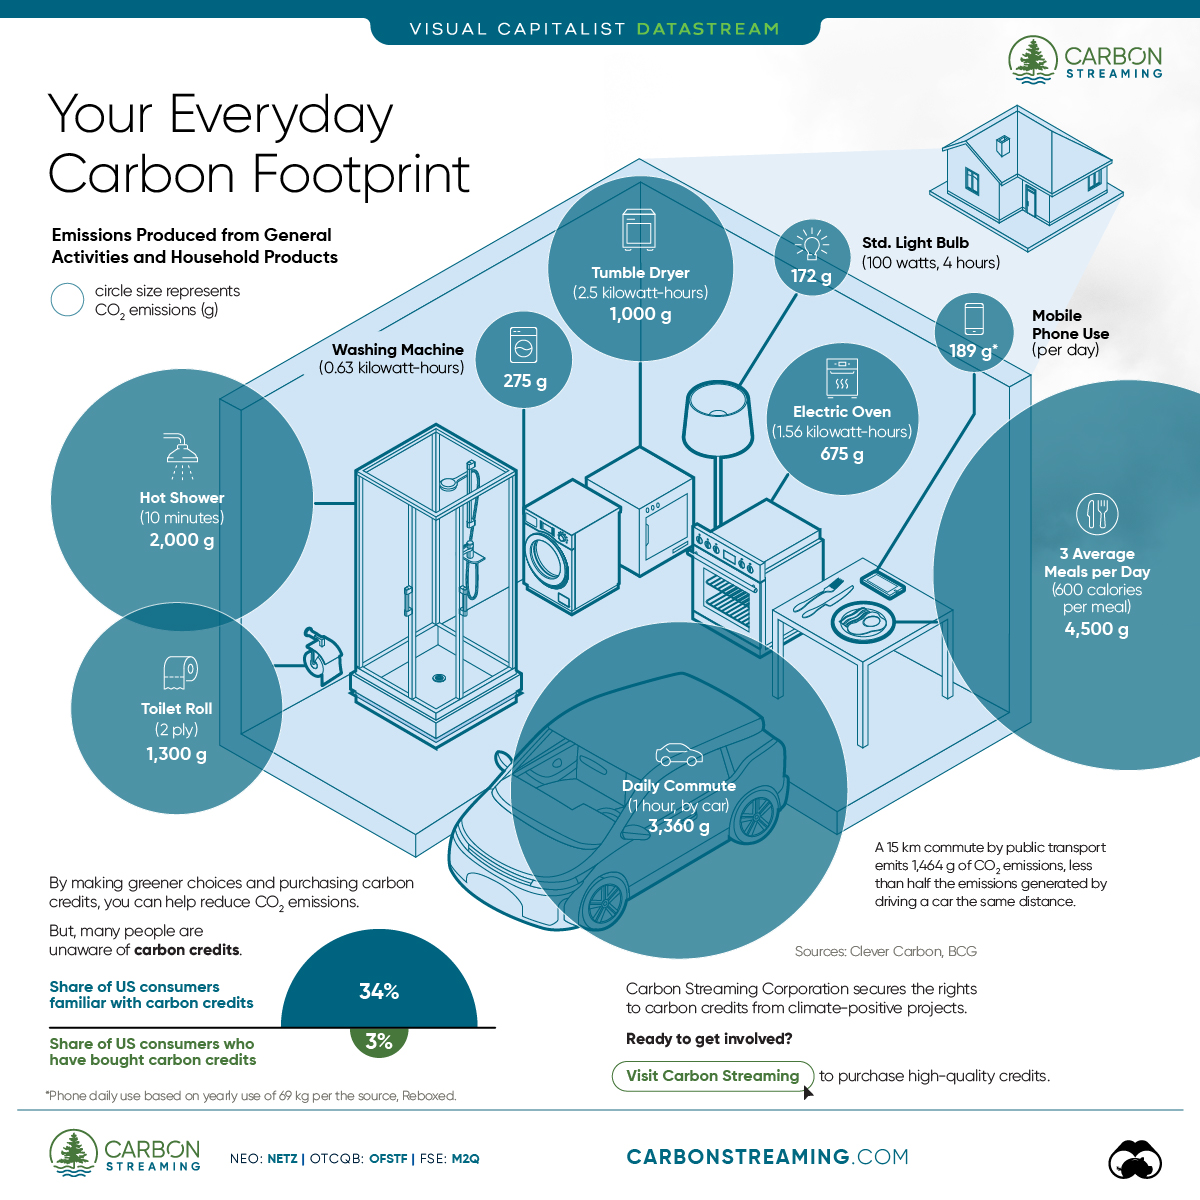 Can You Calculate Your Daily Carbon Footprint?